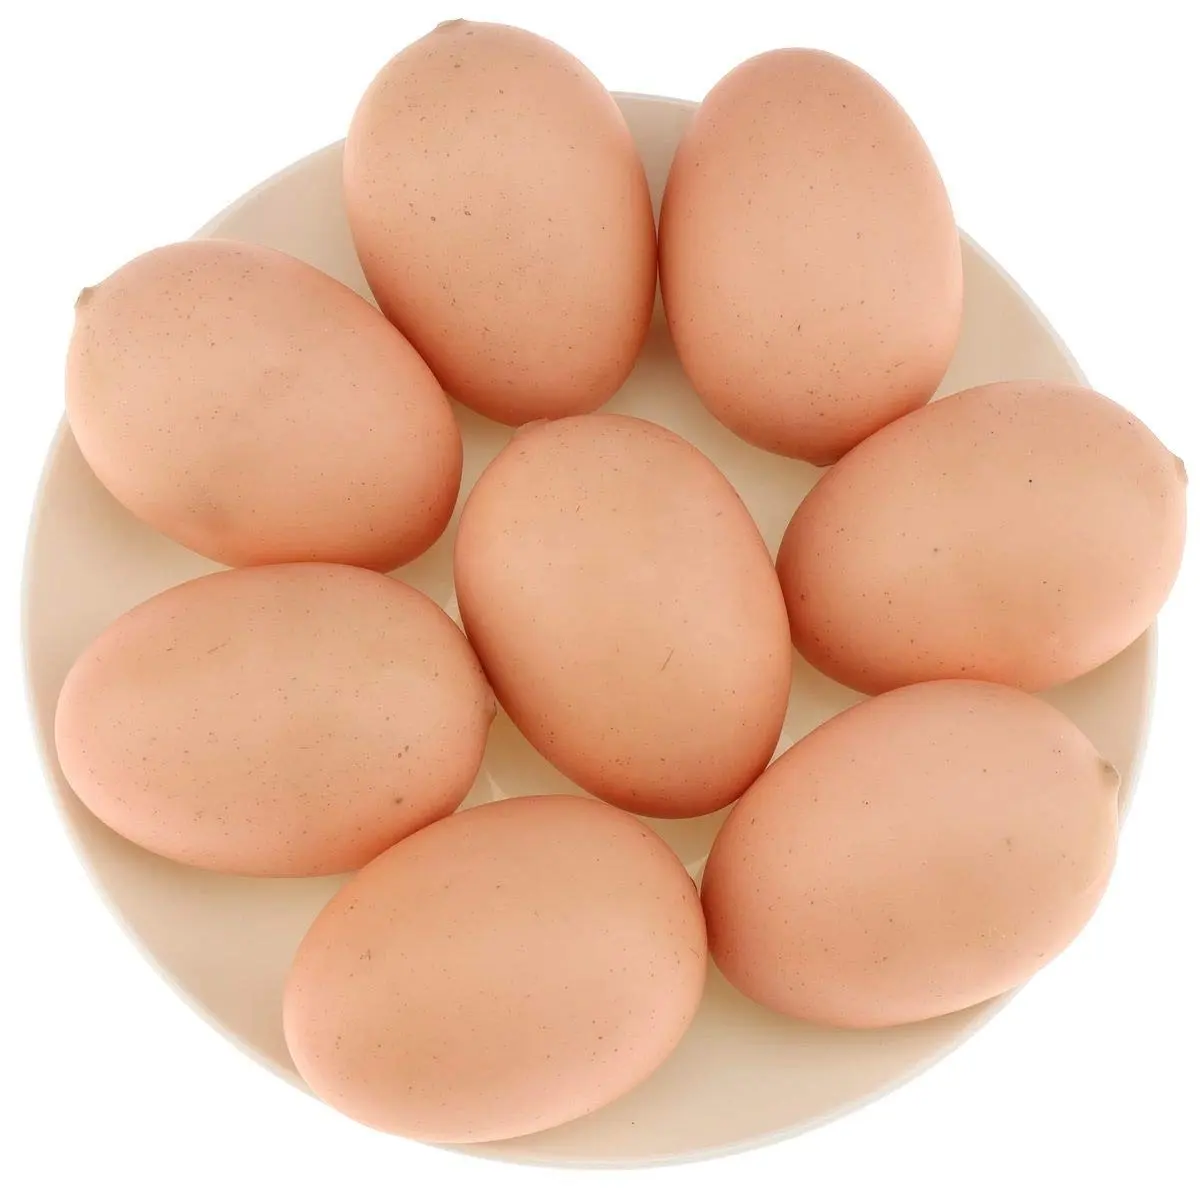 Fresh Chicken Table Eggs & Fertilized Hatching Eggs, White and Brown eggs